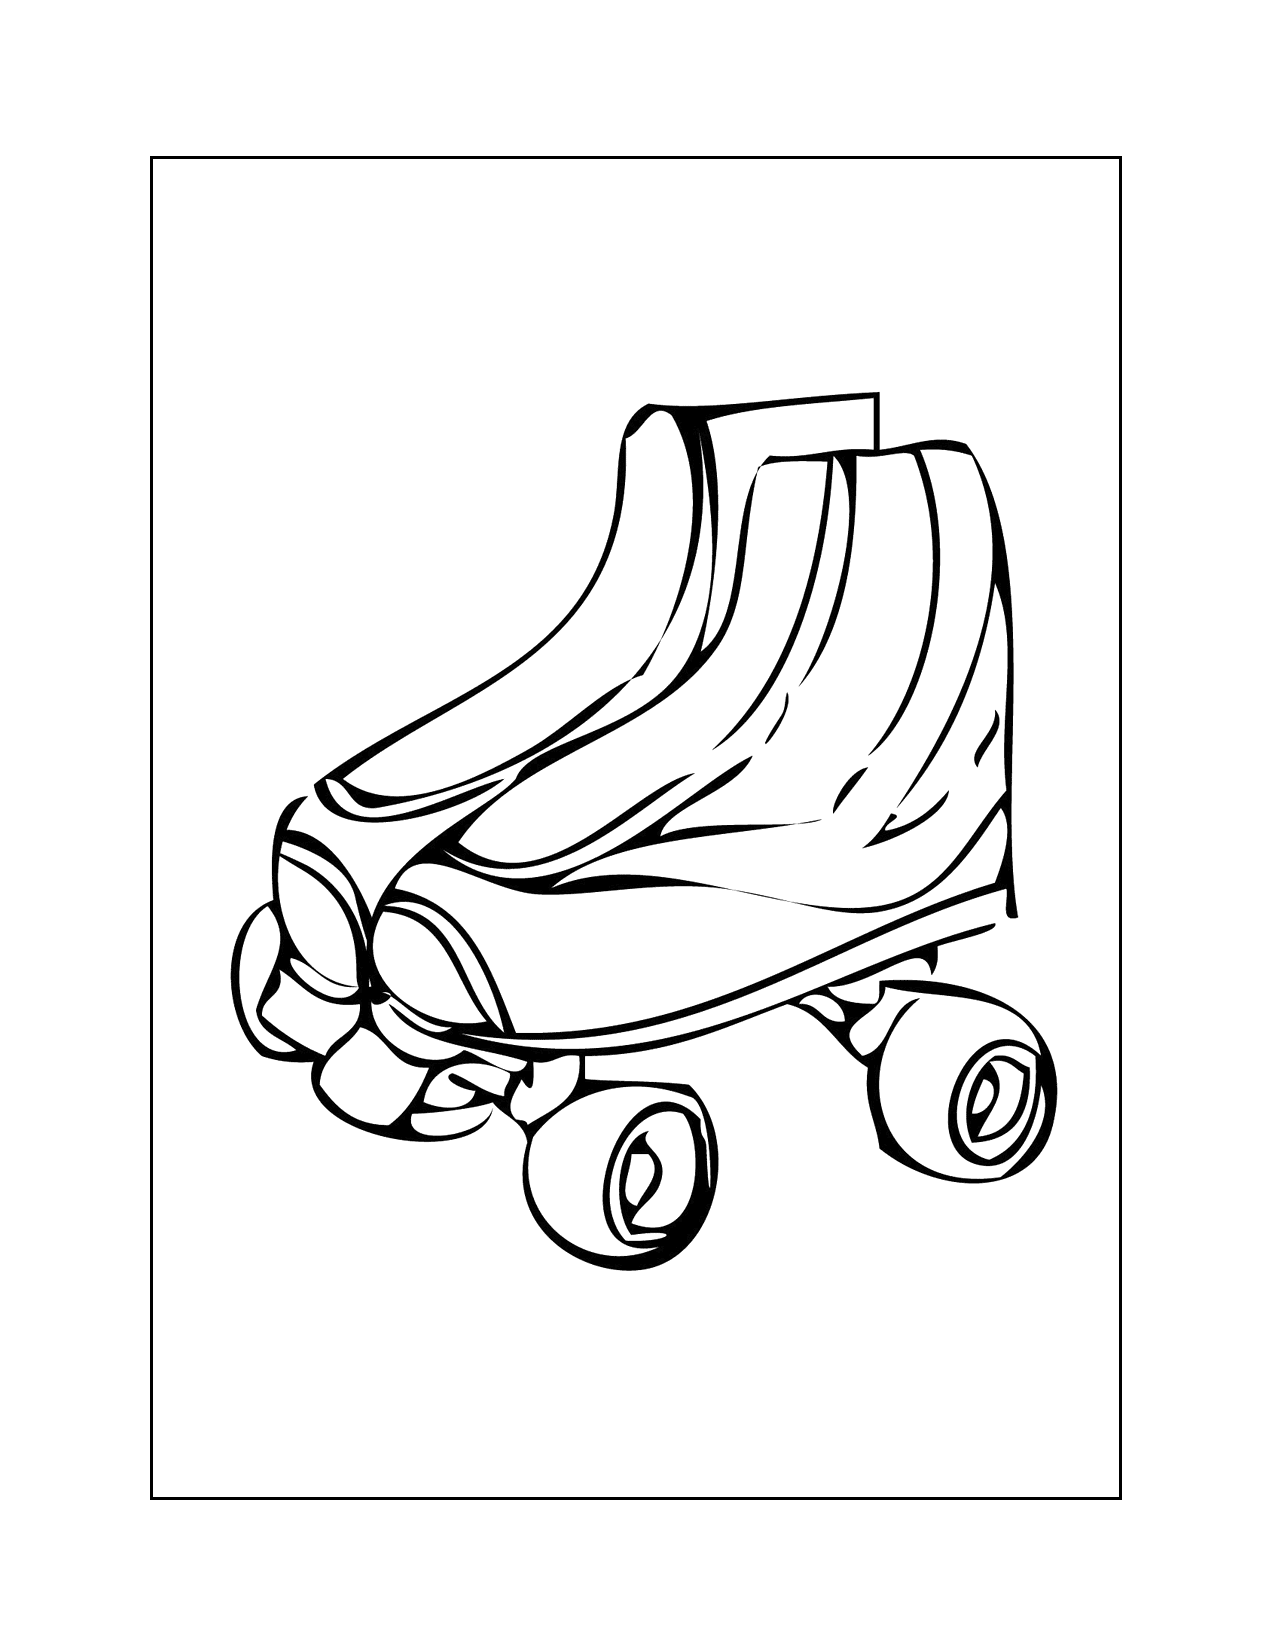 Roller Skates With Boot Covers Coloring Page